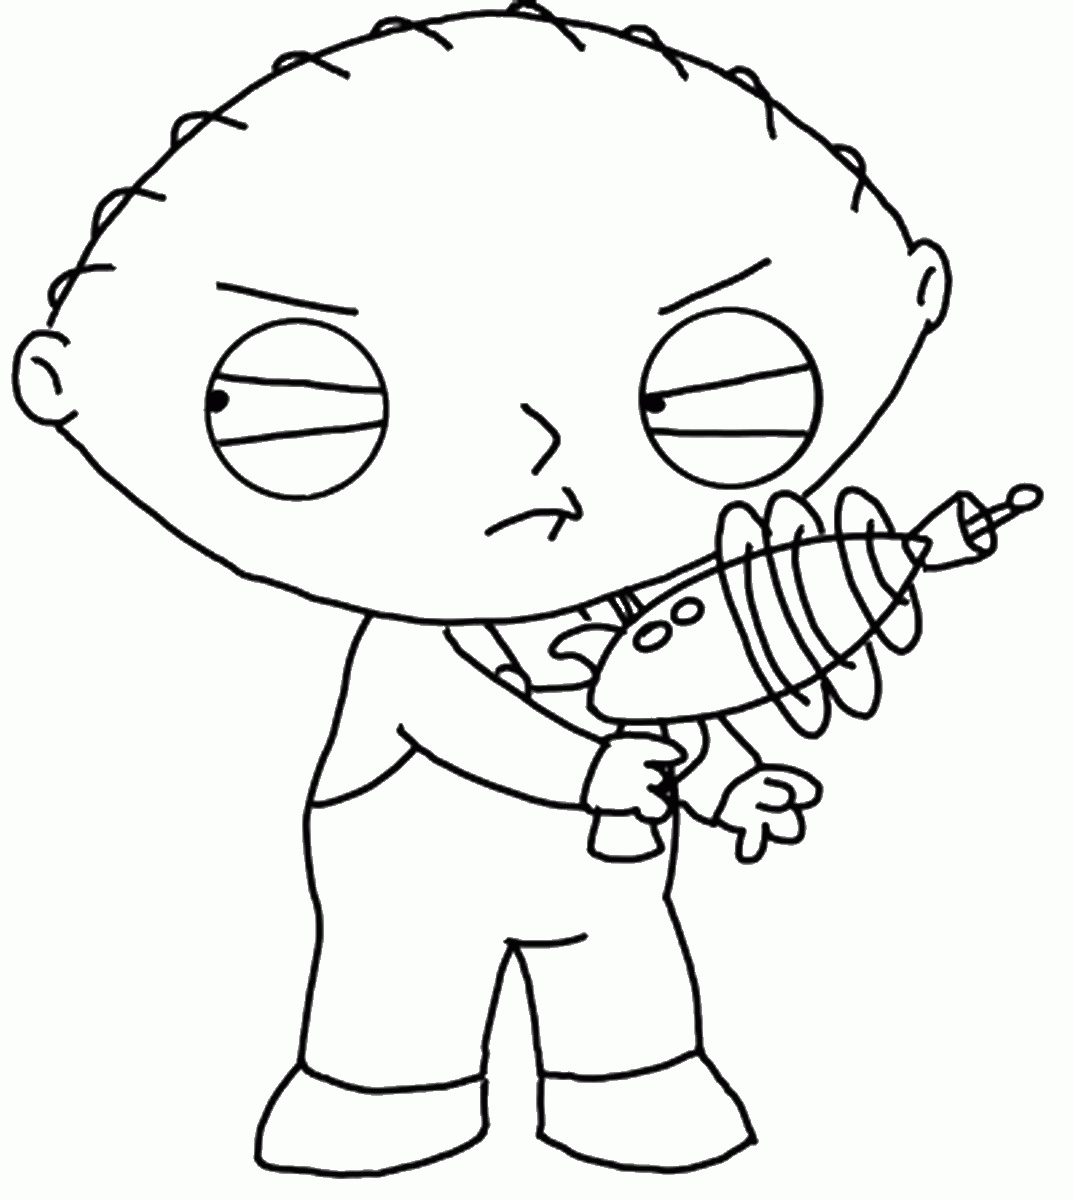 Stewie Family Guy Coloring Pages - Coloring Home